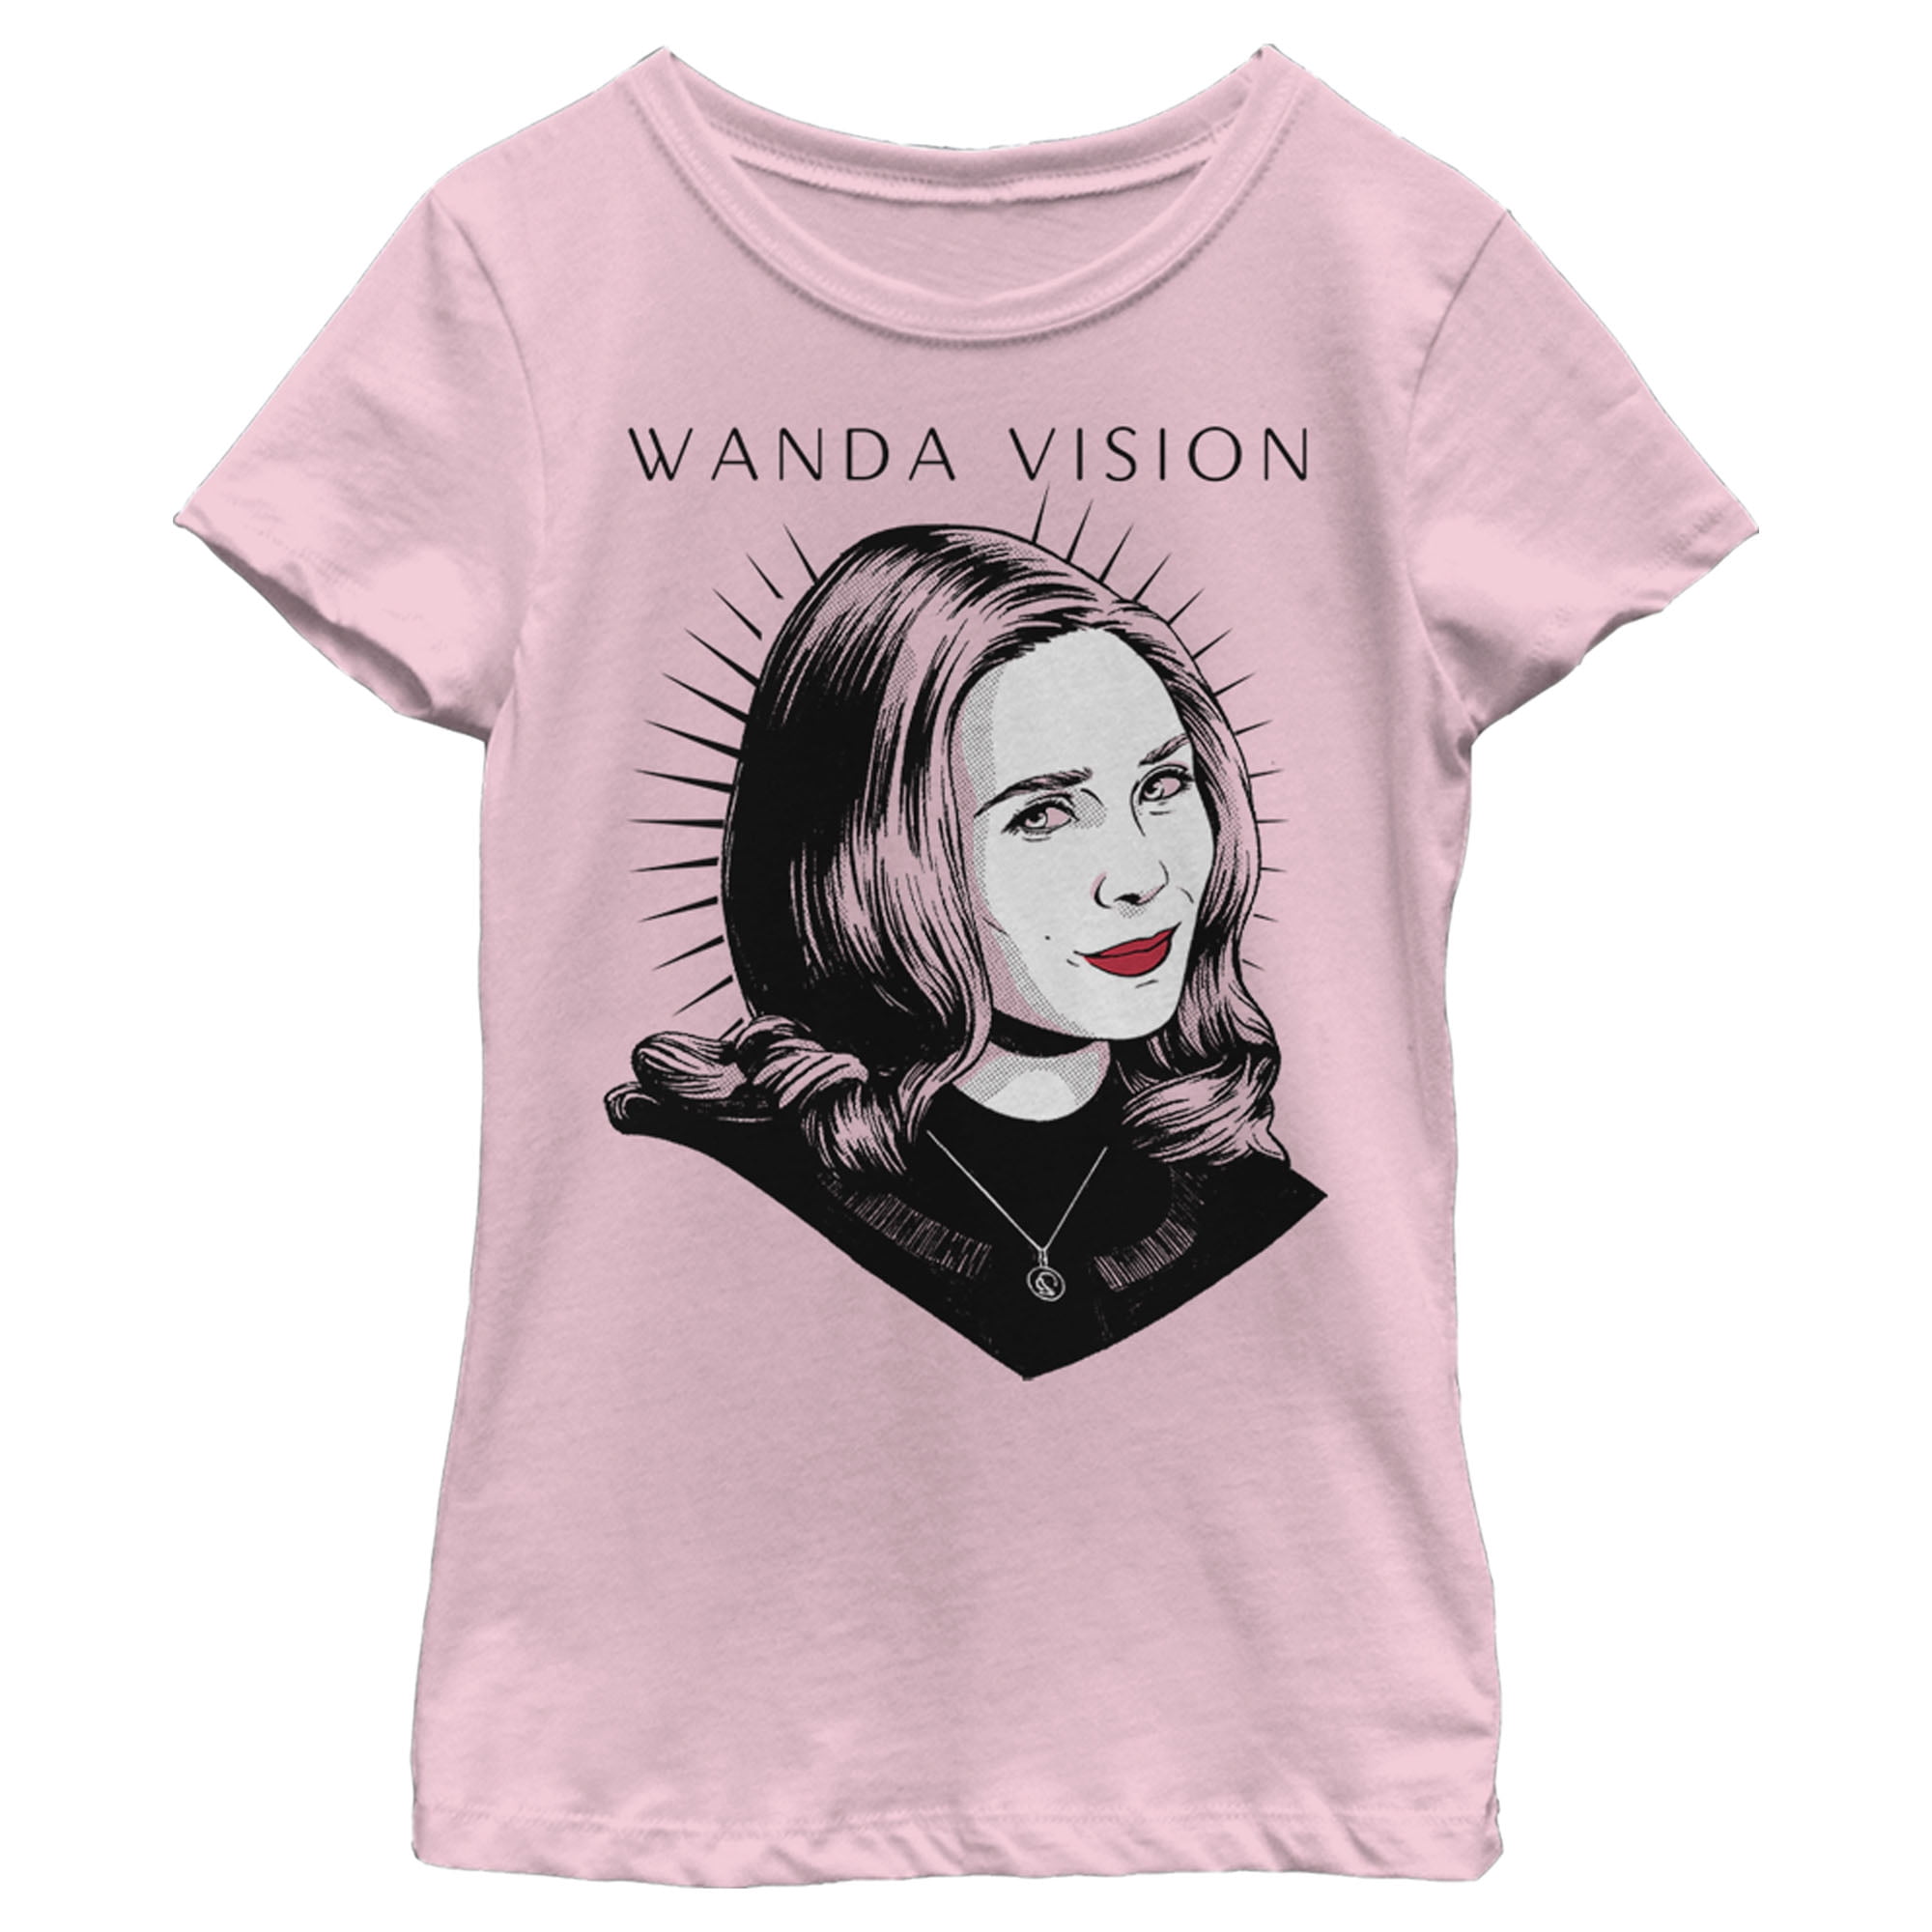 Personalized Gift Special Birthday Gift For Friends Design TShirt Halloween Wanda And Vision Classic T-shirt Graphic Tee Shirt